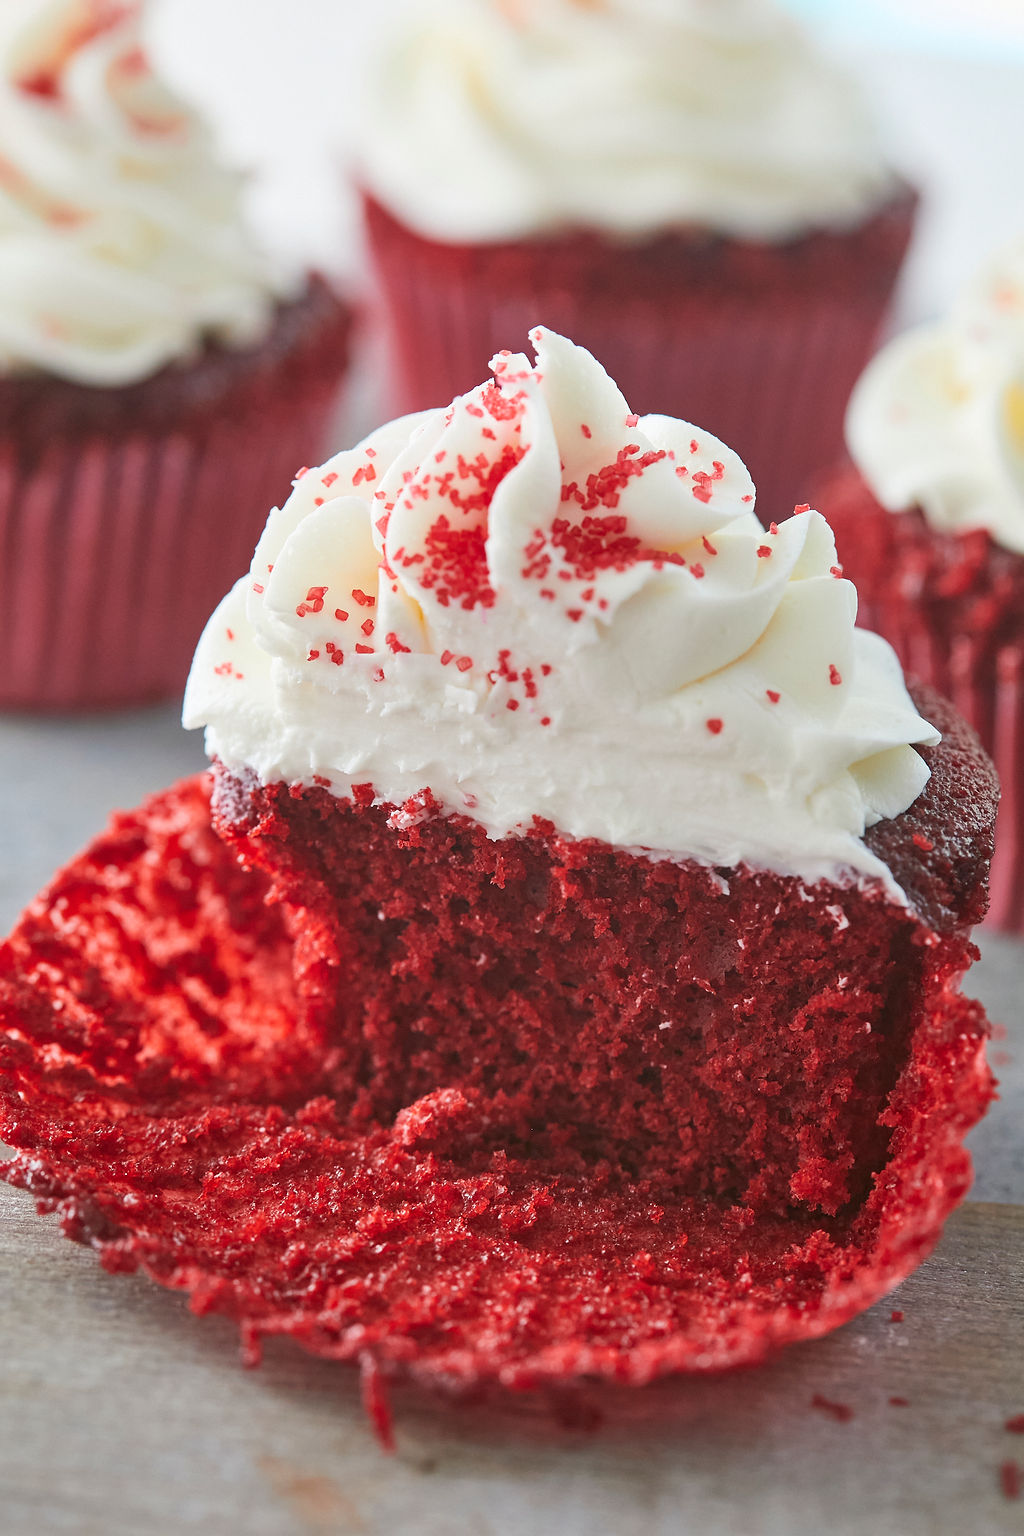 A cross-section of my red velvet cupcake recipe and cream cheese frosting to show texture and consistency.